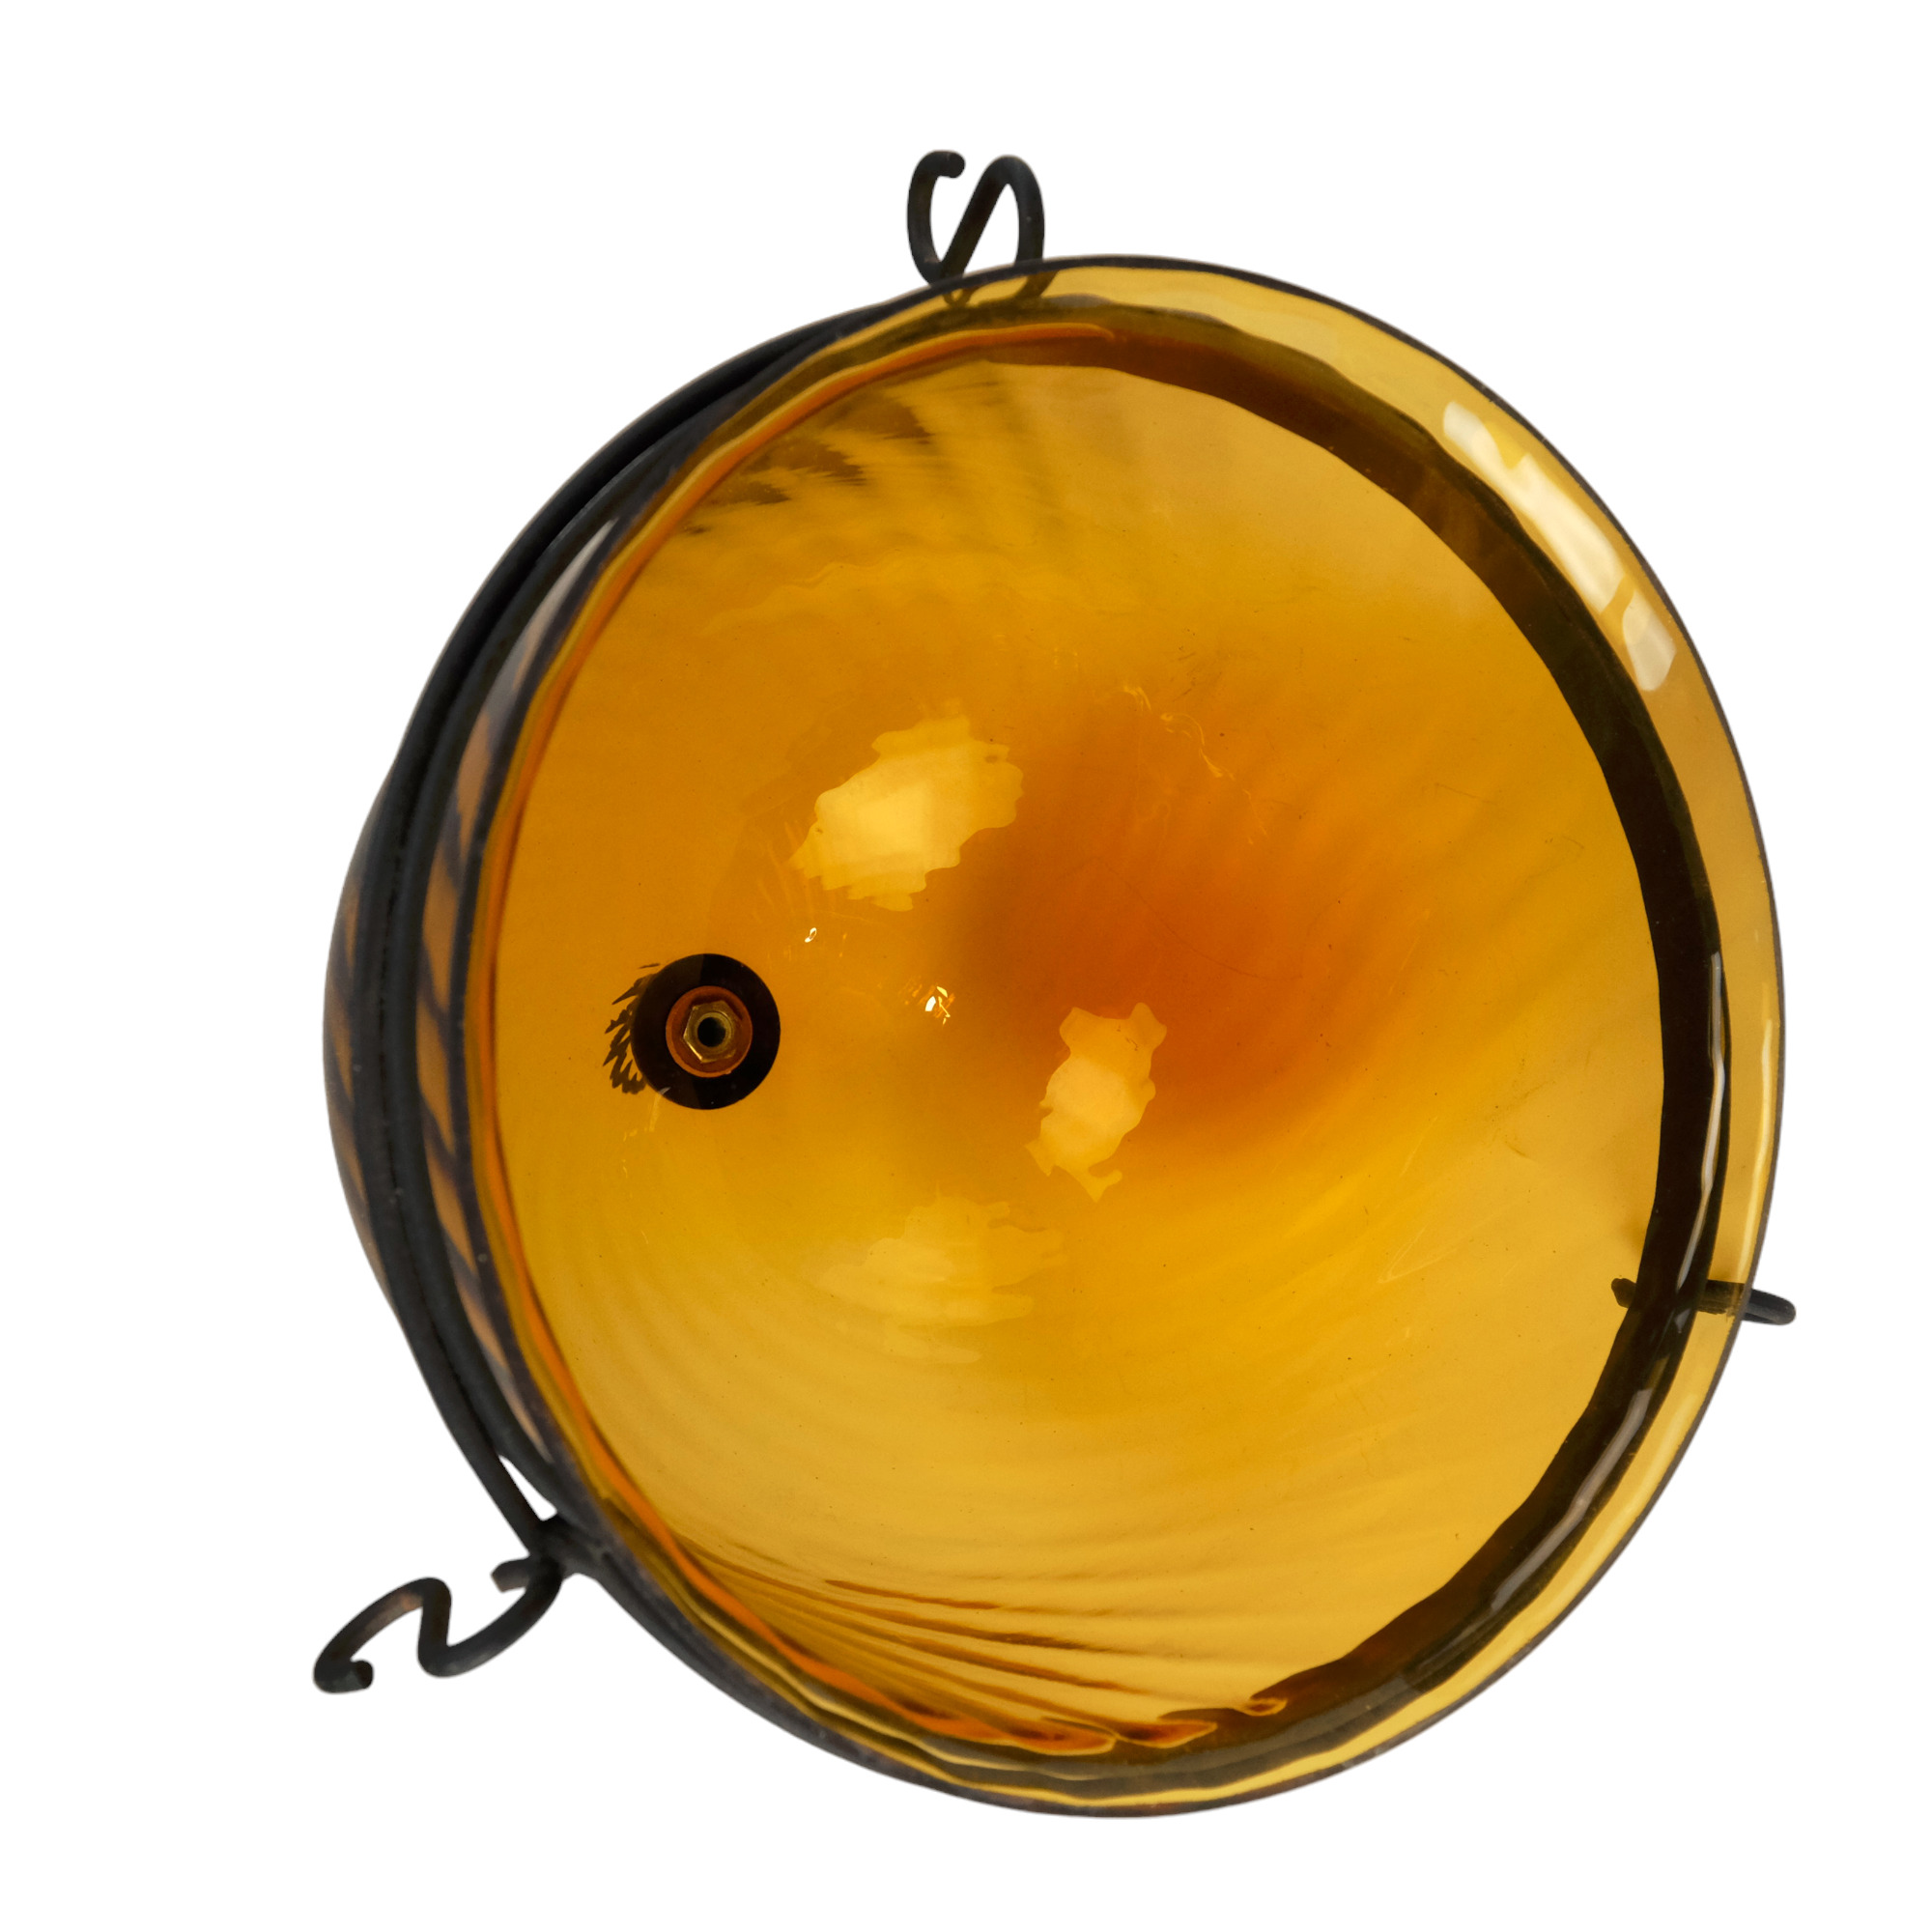 A pendant amber glass lamp shade, 26 cm - Image 3 of 3